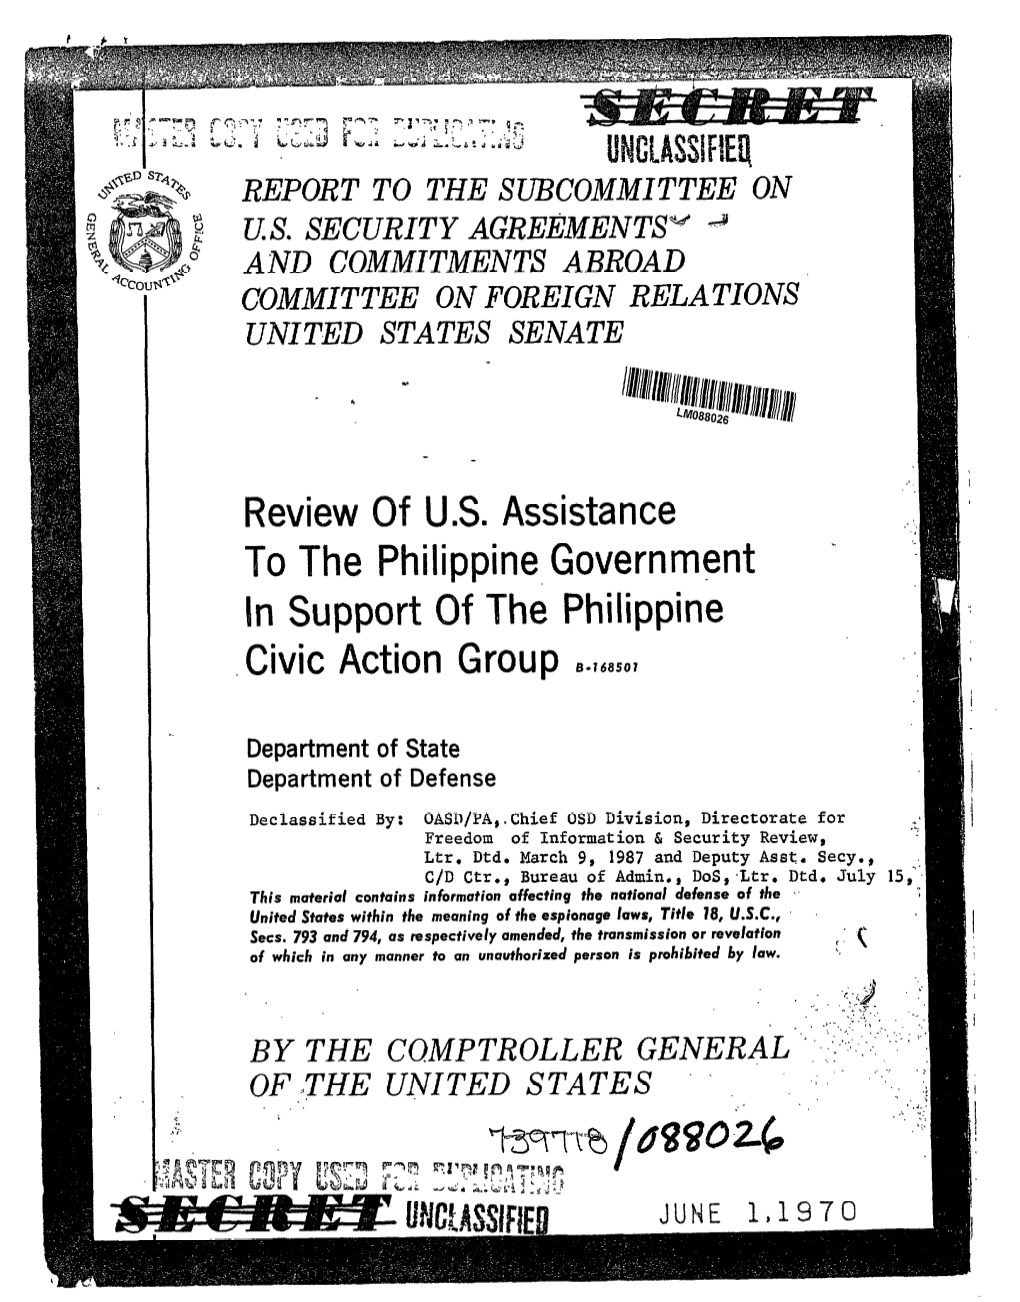 B-168501 Review of U.S. Assistance to the Philippine Government In